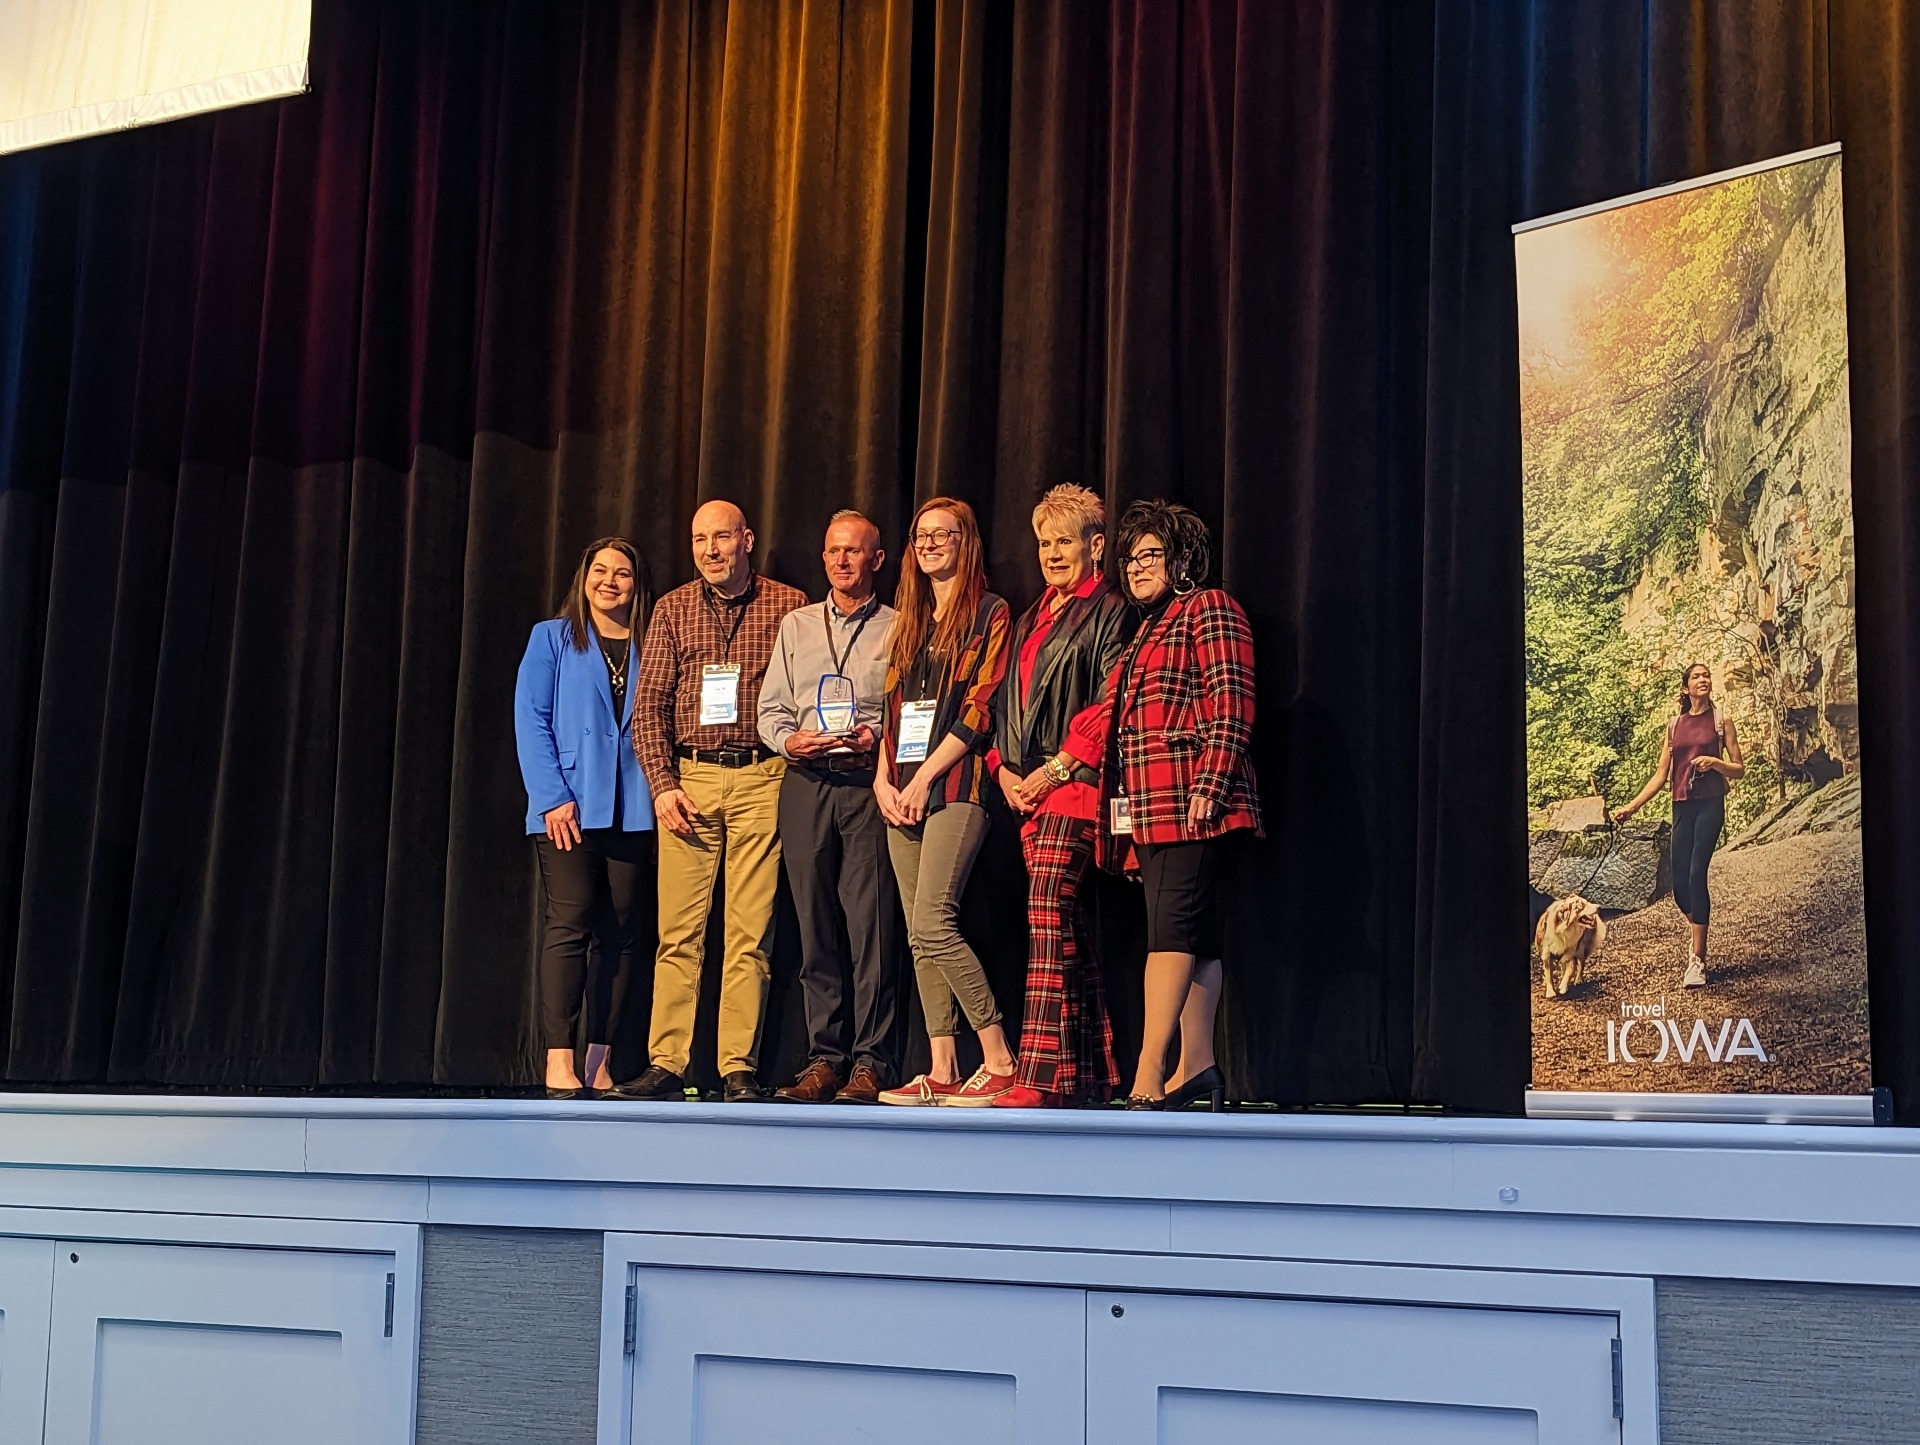 Council Bluffs Wins Big at the 2023 Iowa Tourism Conference Blog